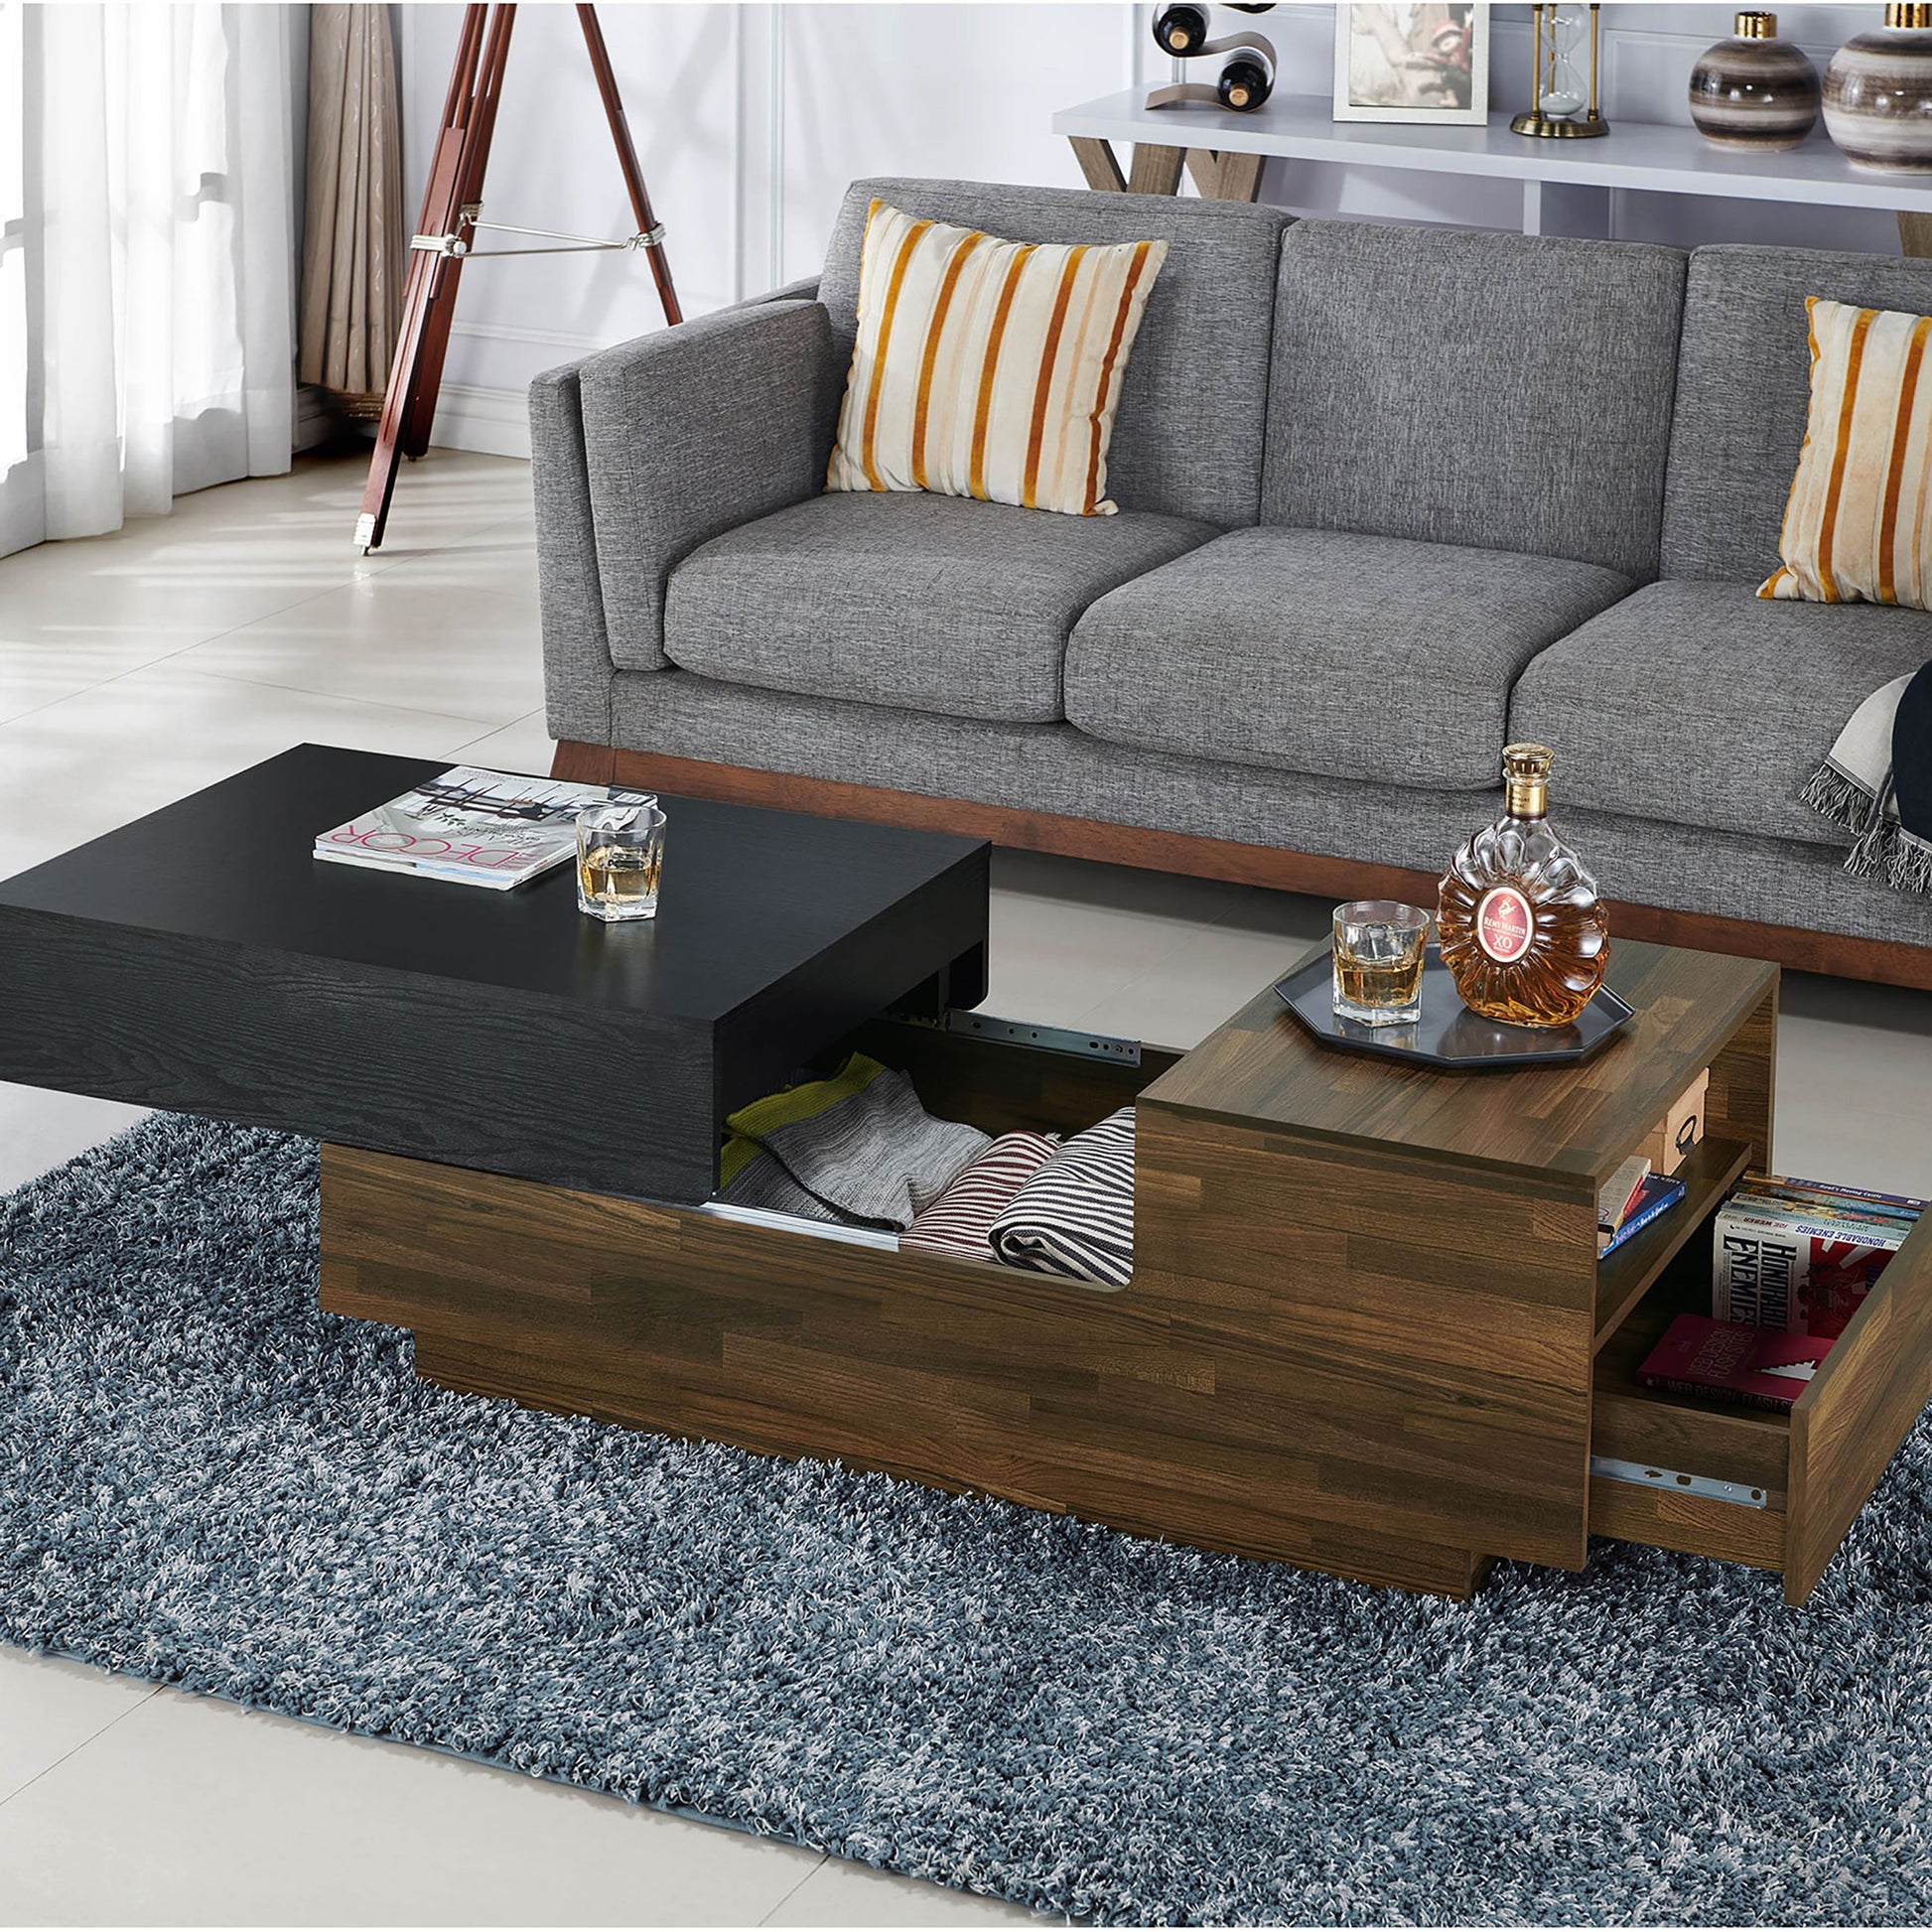 Left angled contemporary light hickory and black sliding top one-drawer coffee table with top and drawer open in a living room with accessories